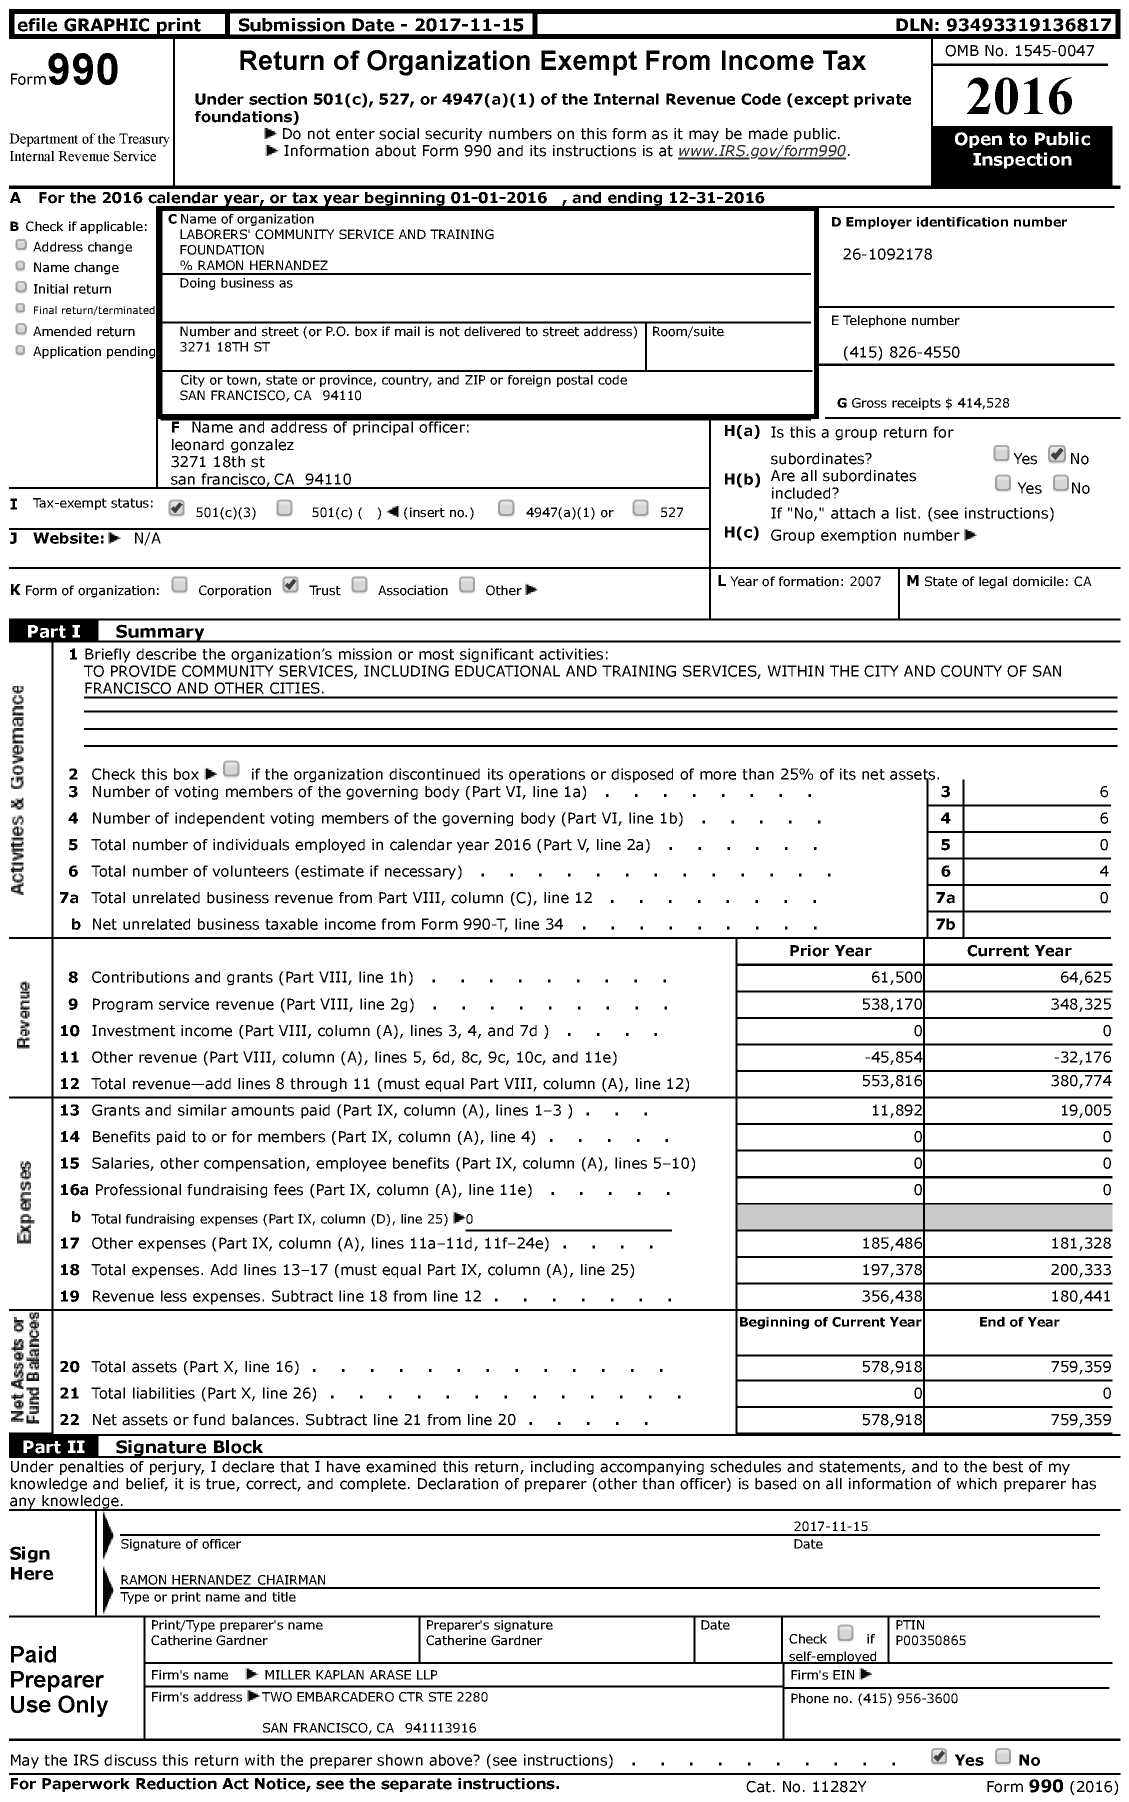 Image of first page of 2016 Form 990 for Laborers' Community Service and Training Foundation